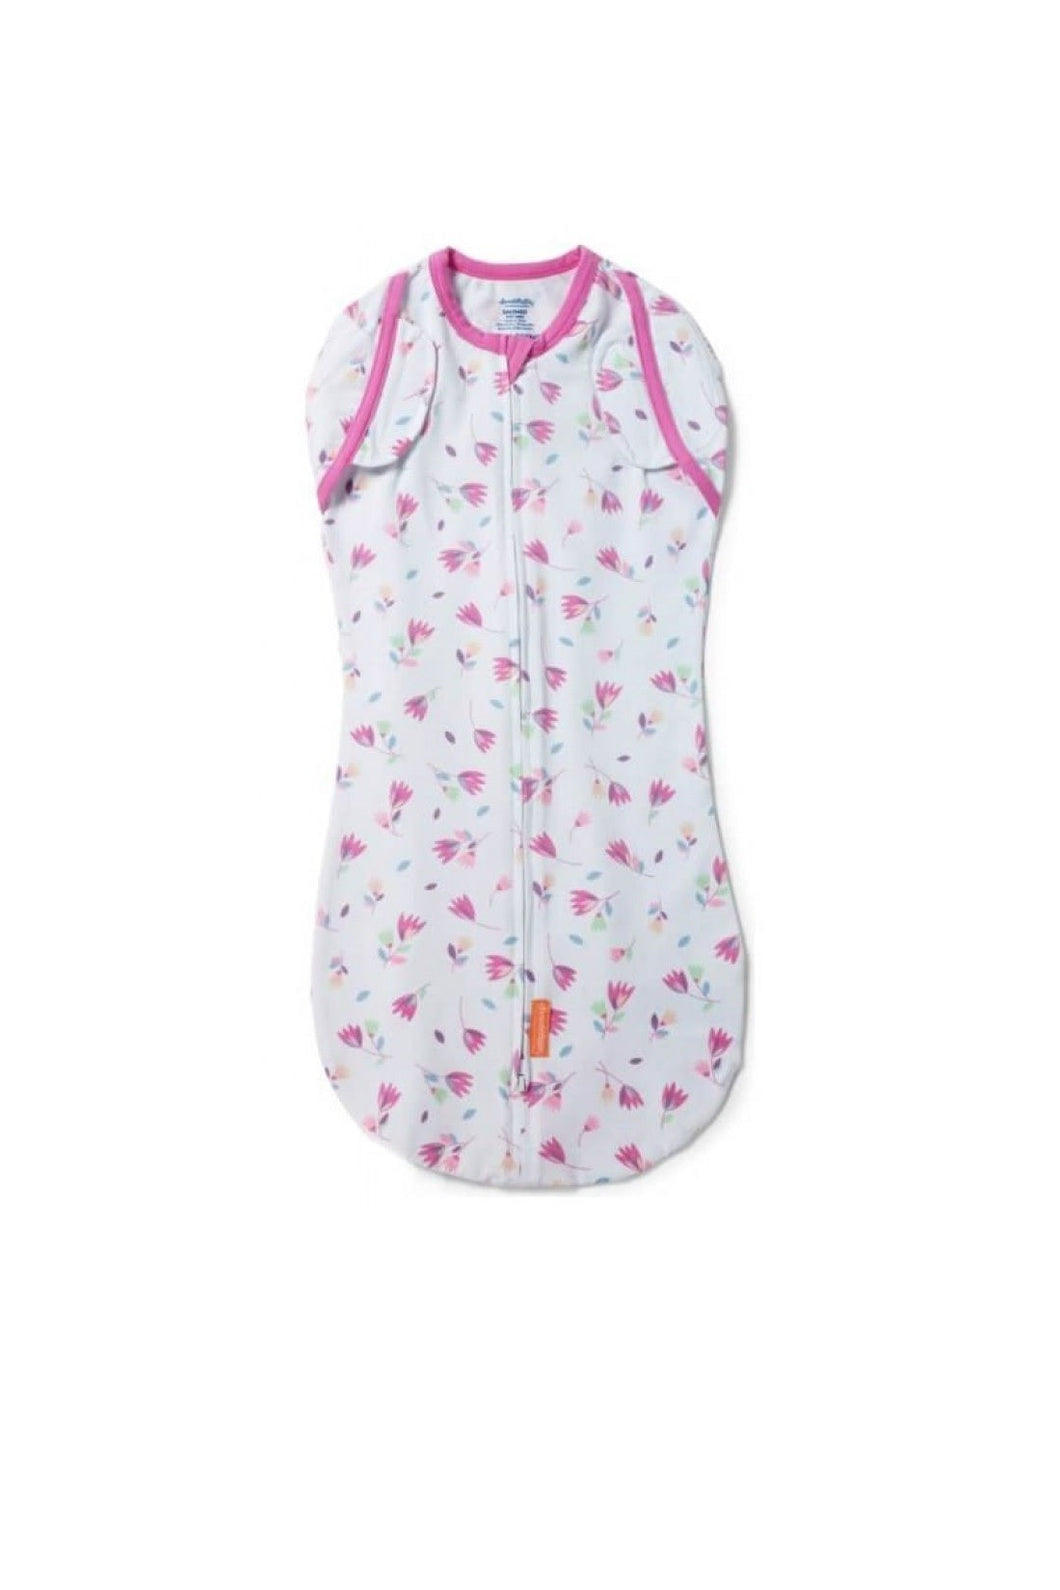 Summer Infant Swaddleme Arms Free Convertible Pod Tumbling Tulip 1